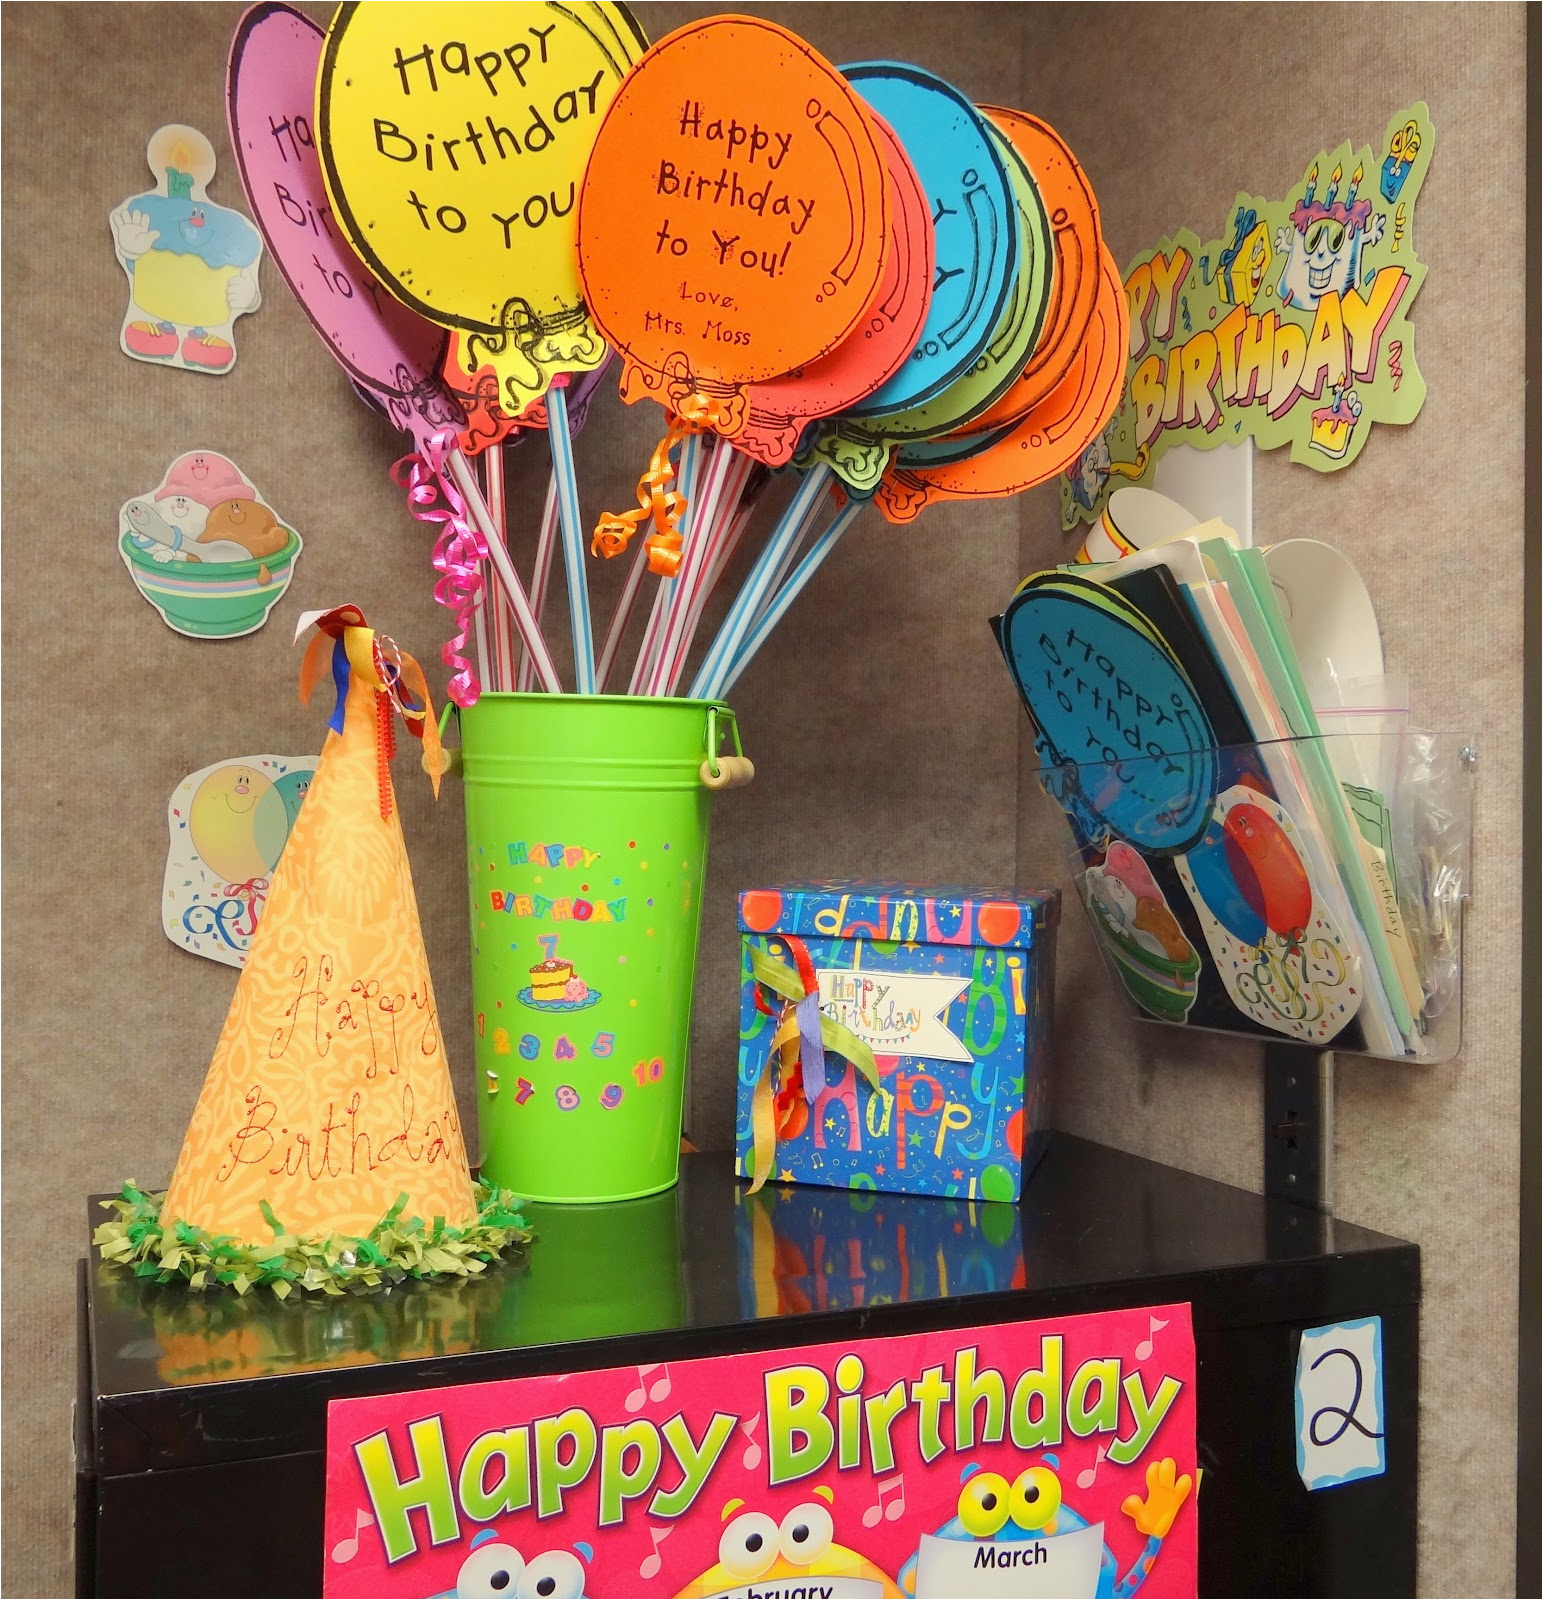 patties classroom what are your birthday gift ideas for